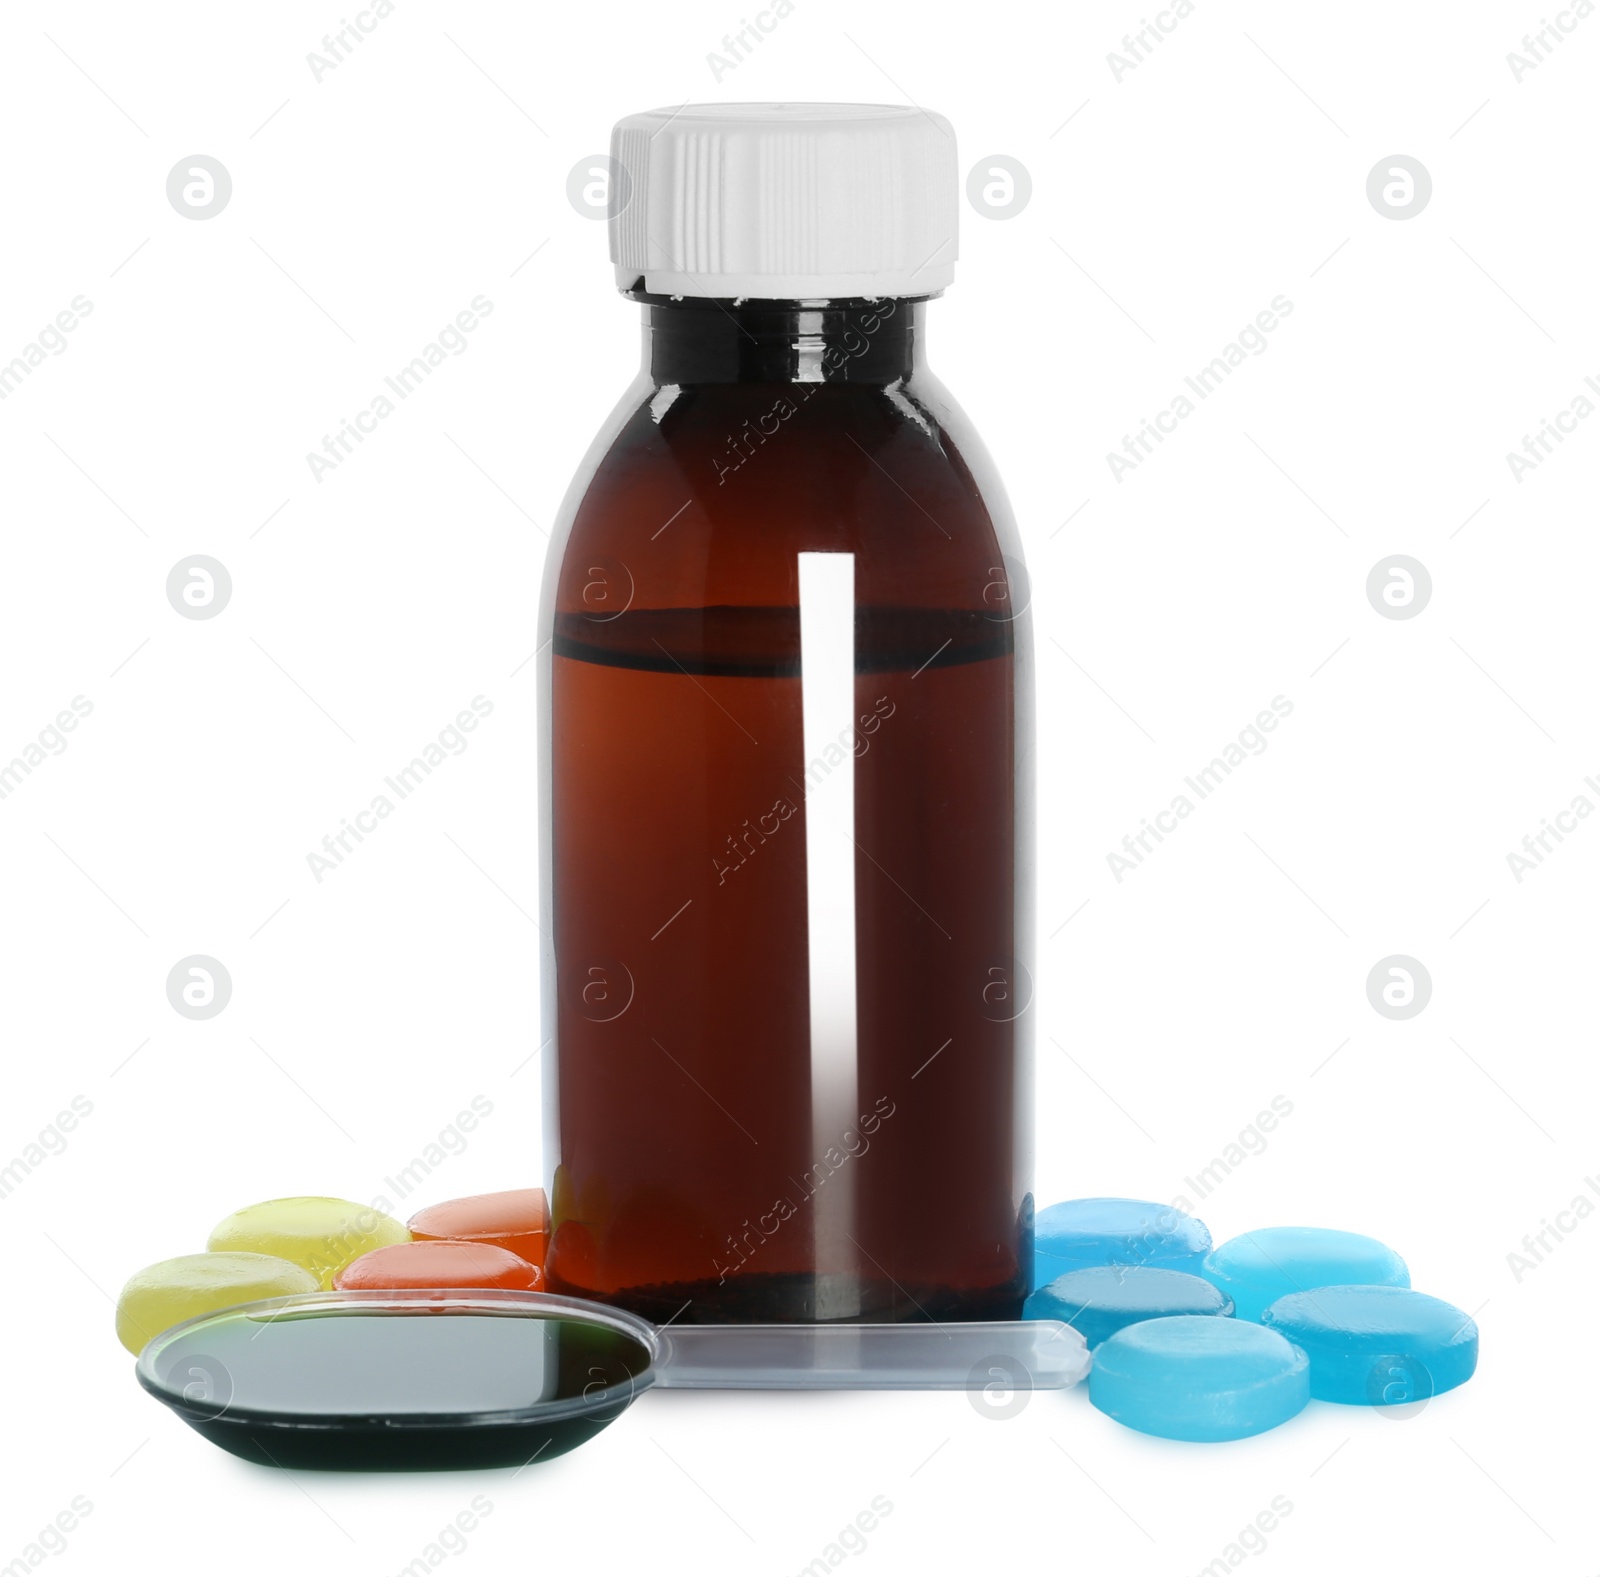 Photo of Bottle of syrup, dosing spoon and cough drops on white background